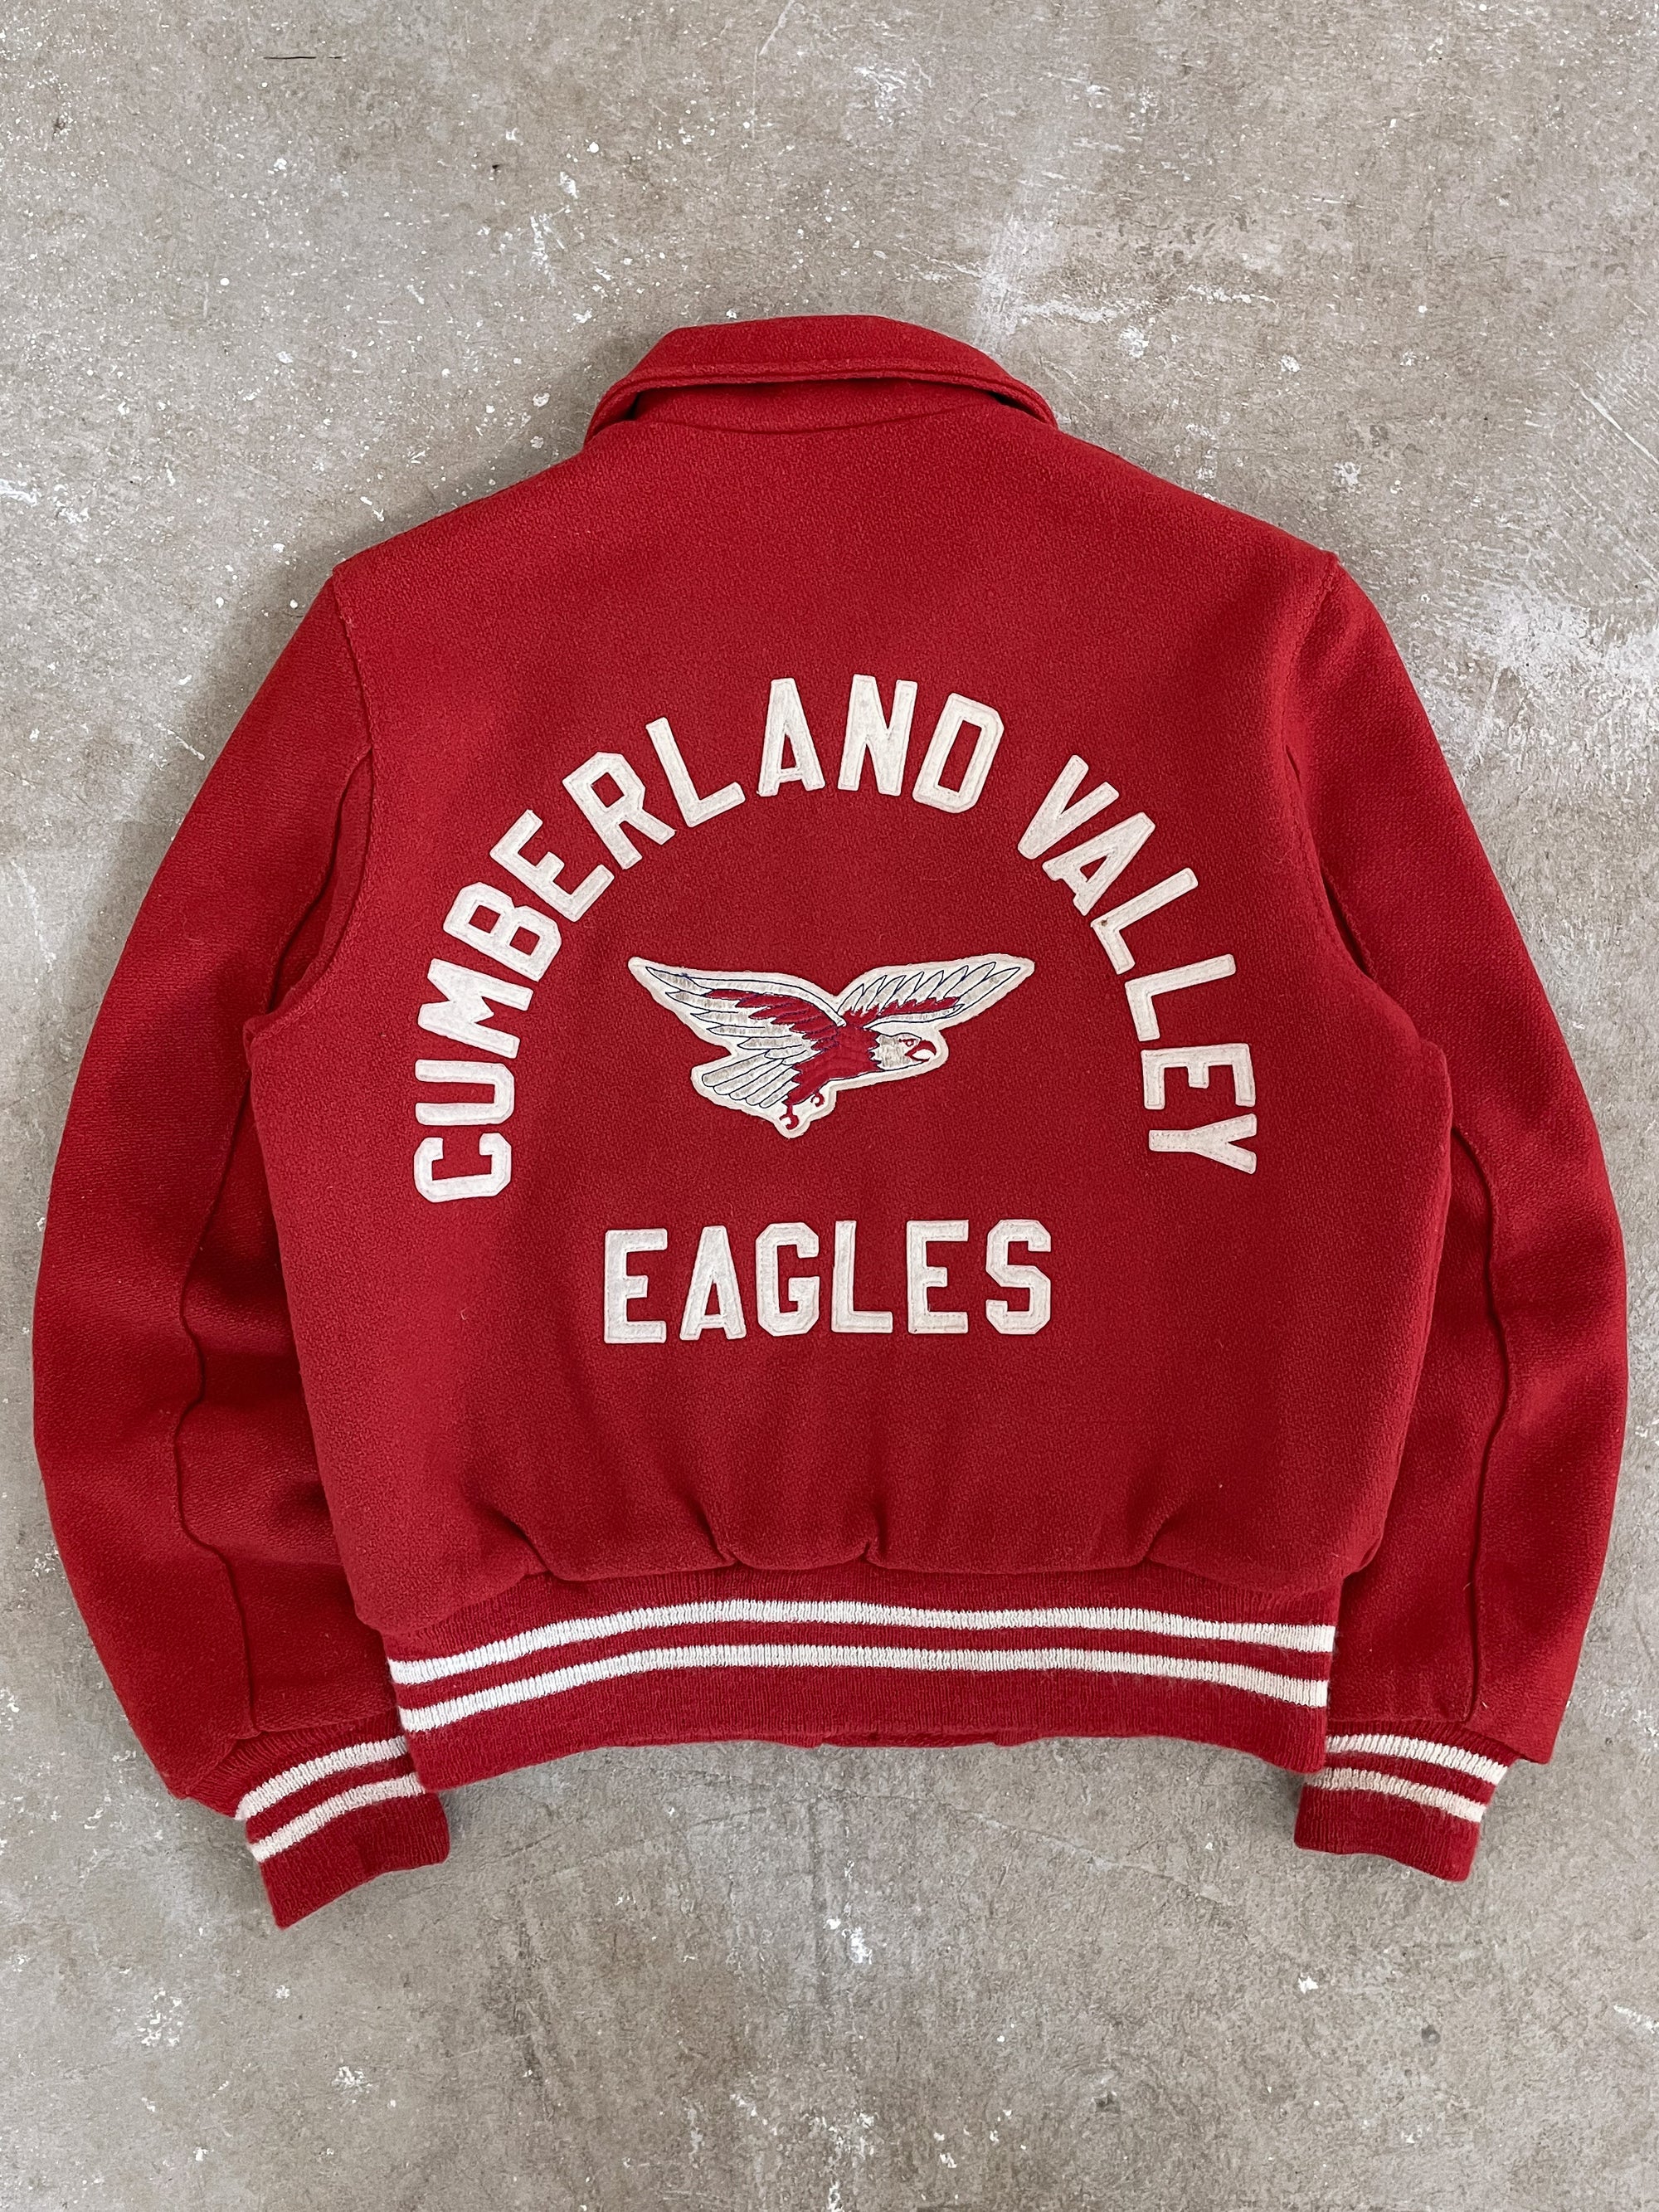 1980s “Cumberland Valley Eagles” Chain Stitched Varsity Jacket (S/M)